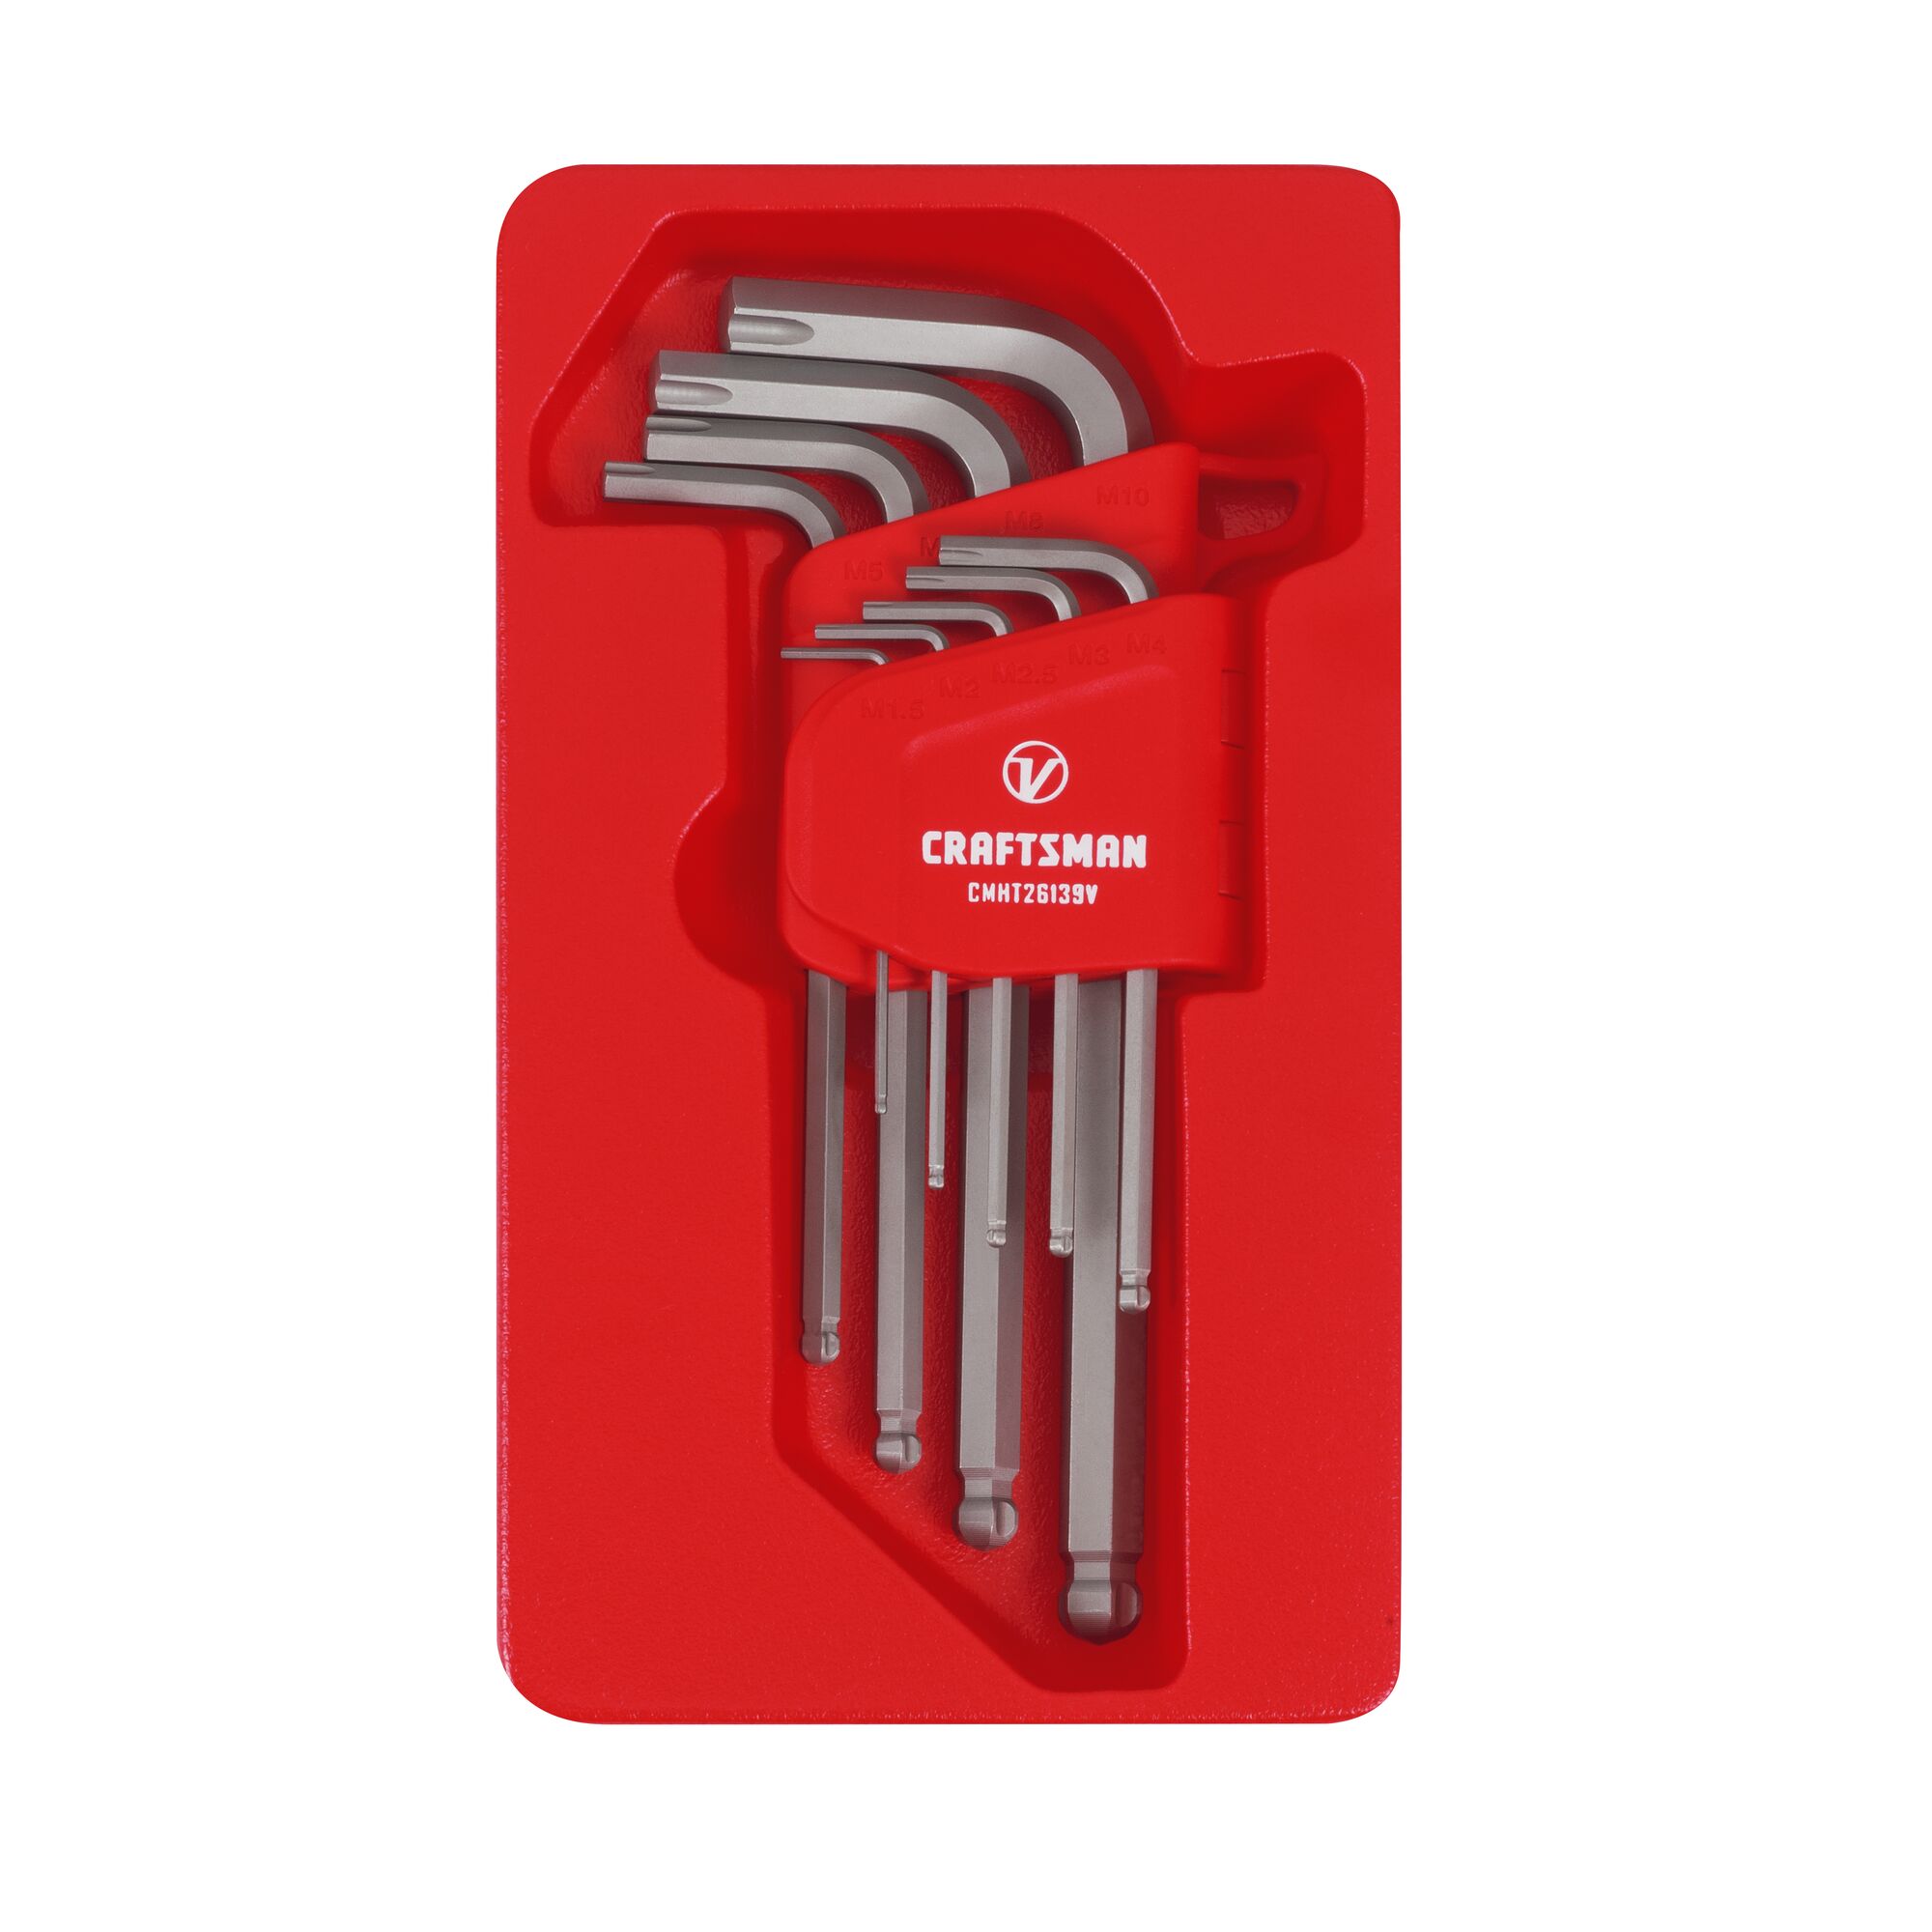 V series 9 piece x tract technology metric l key set in plastic packaging.